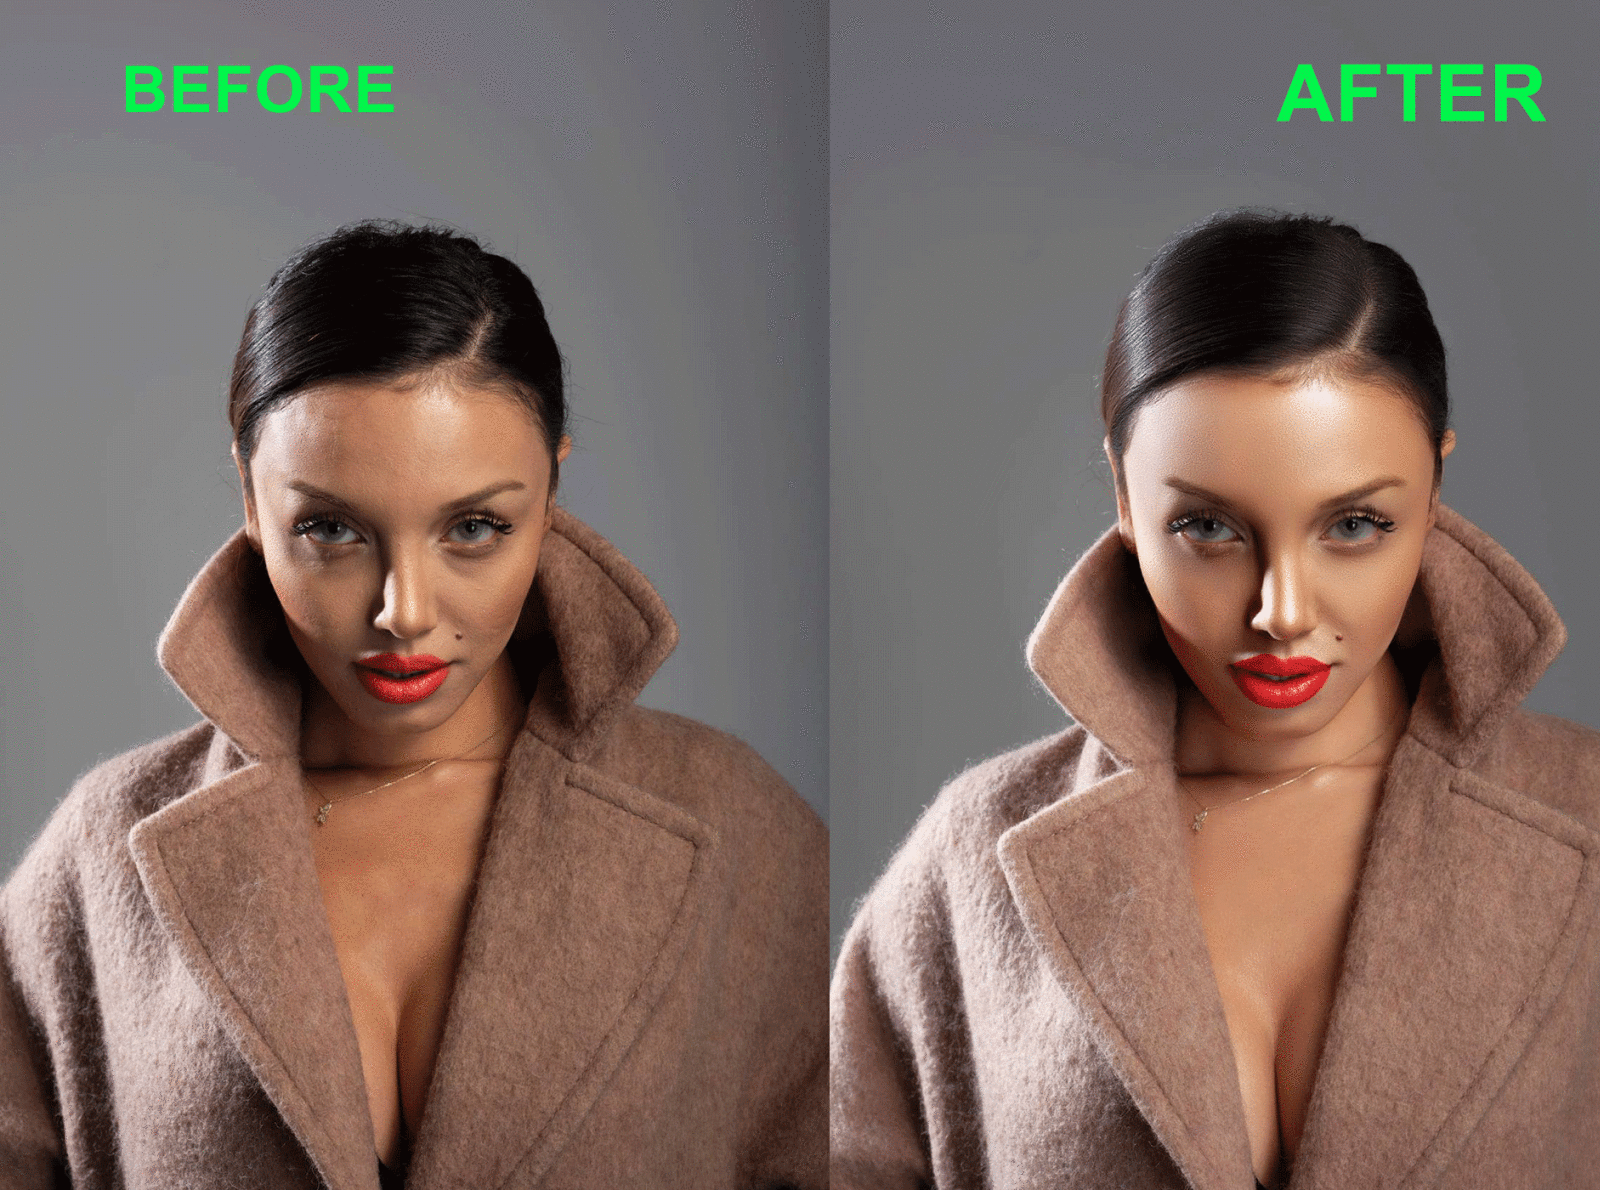 Retouching services professionally background removal clippingpath design editing photoshop remove background resizing transparent web design white background